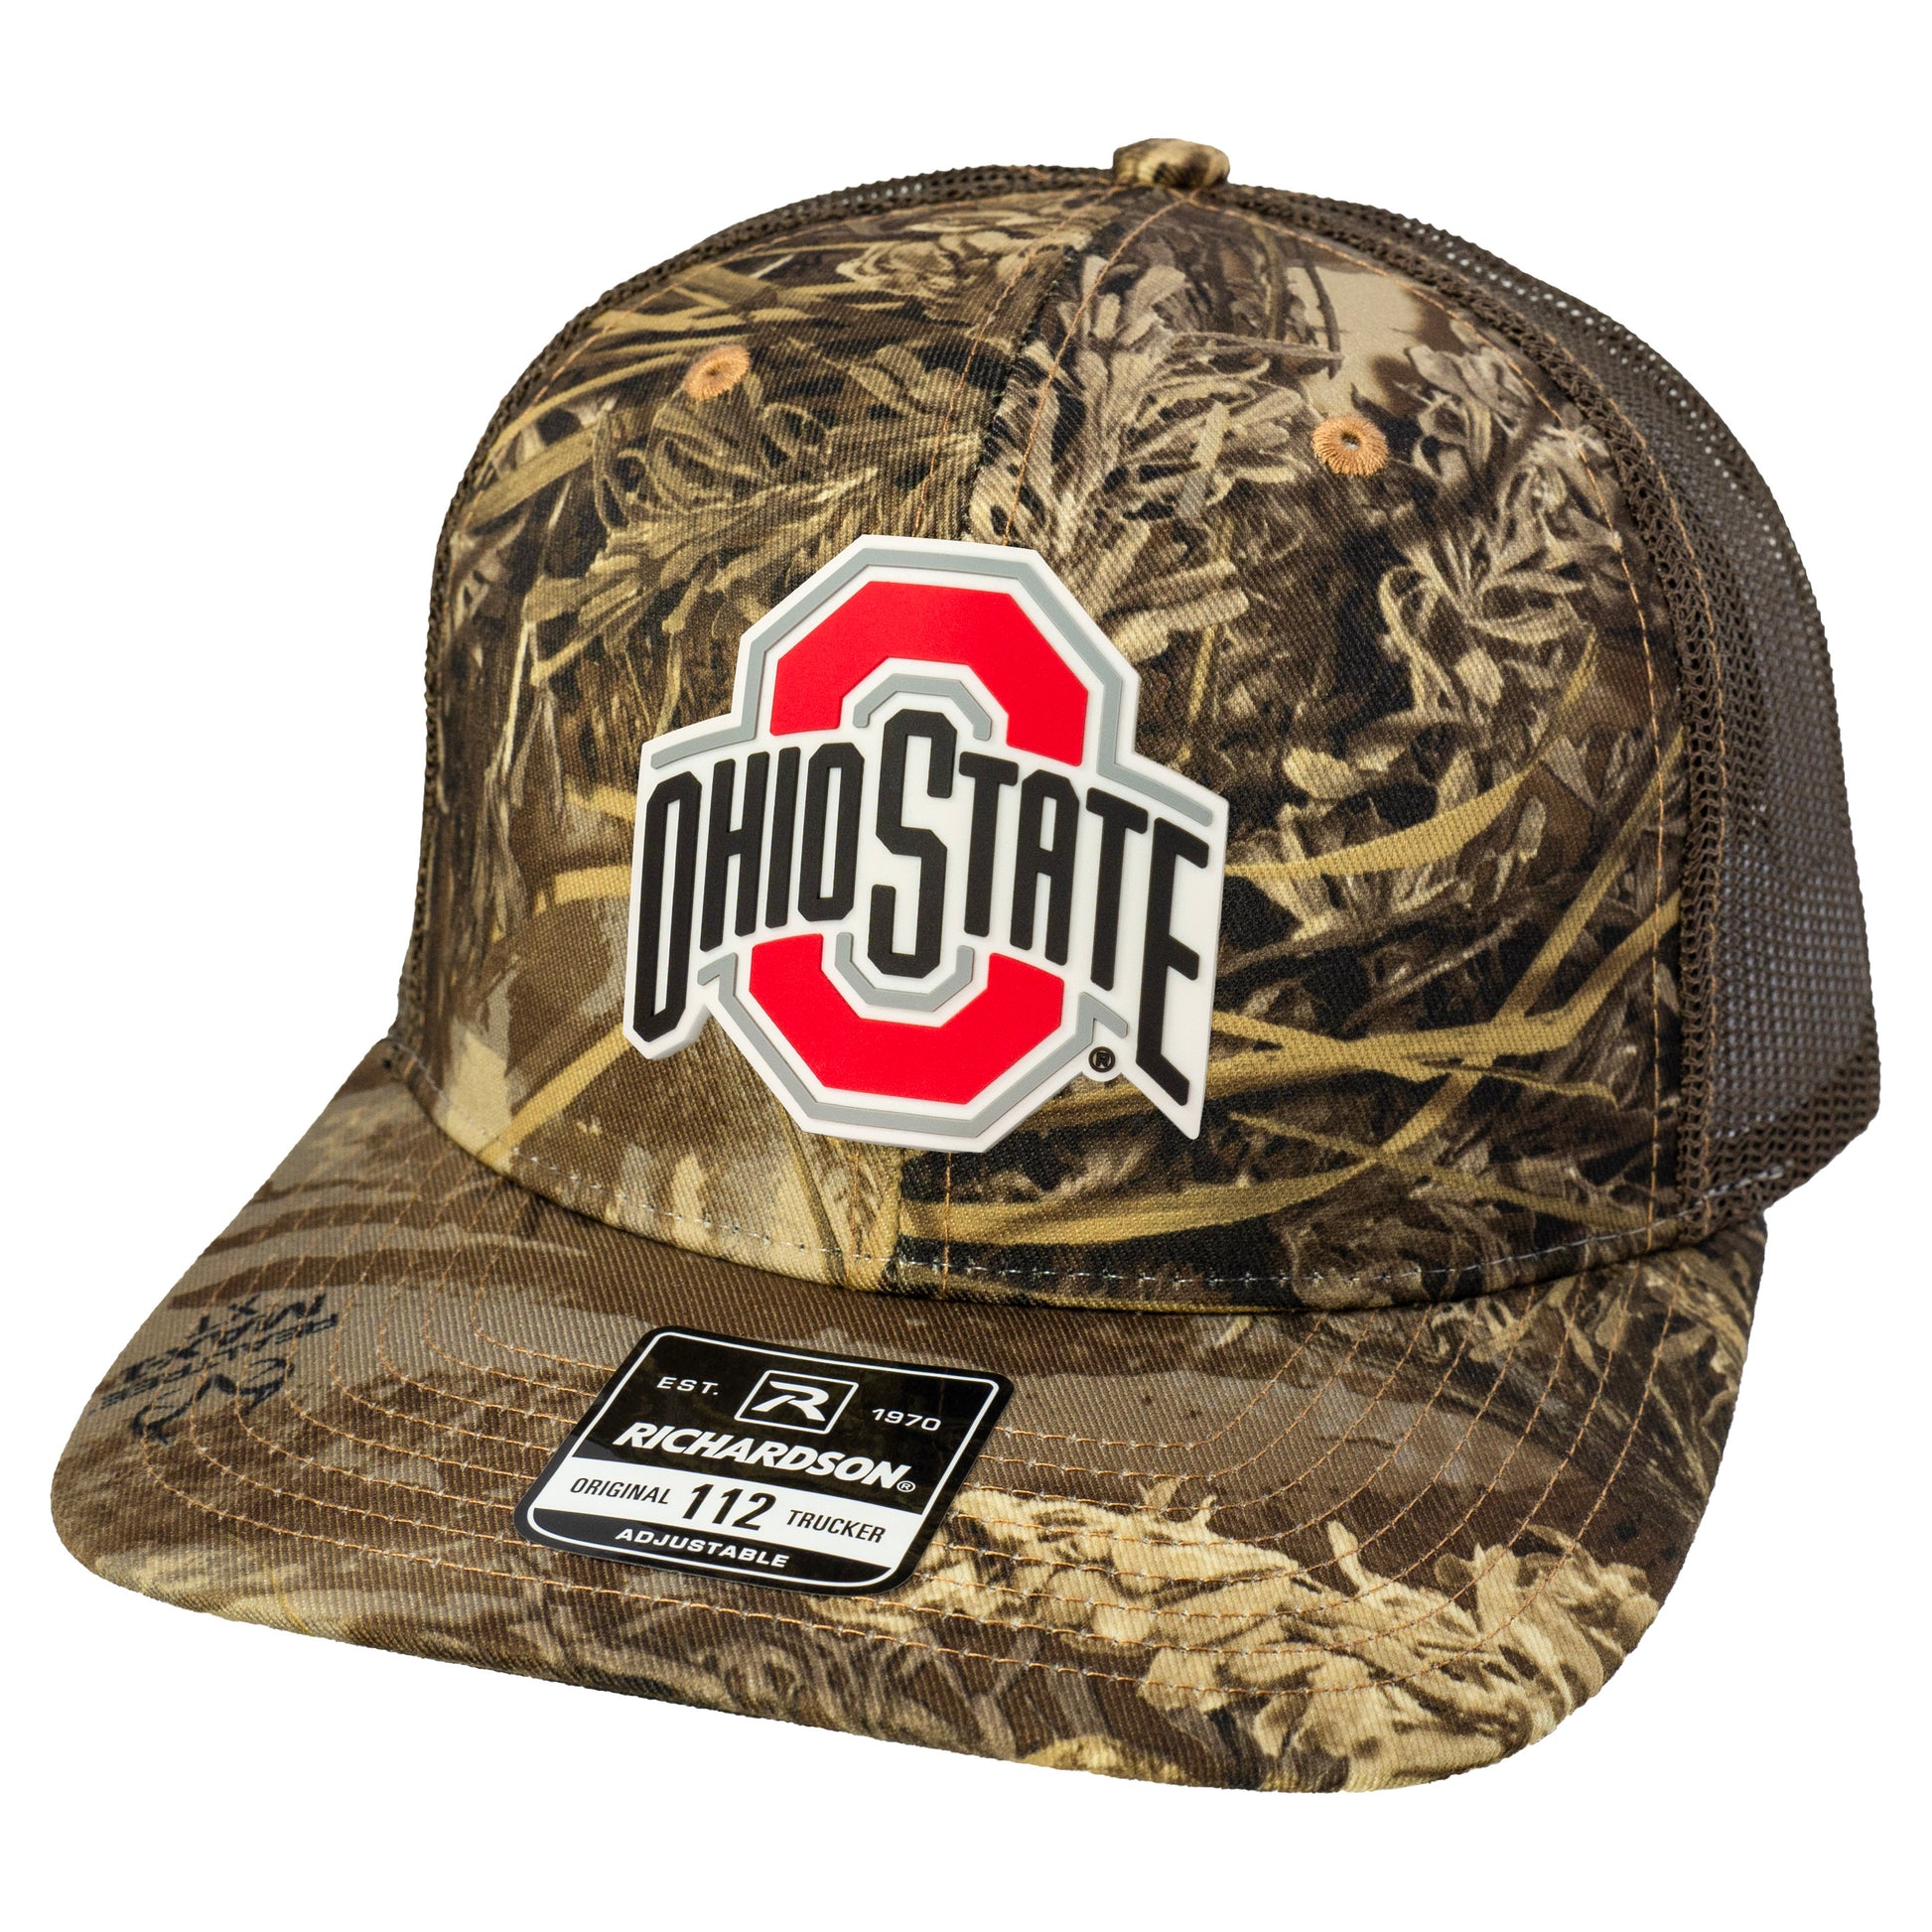 Ohio State Buckeyes 3D Patterned Snapback Trucker Hat- Realtree Max-1/ Brown - Ten Gallon Hat Co.